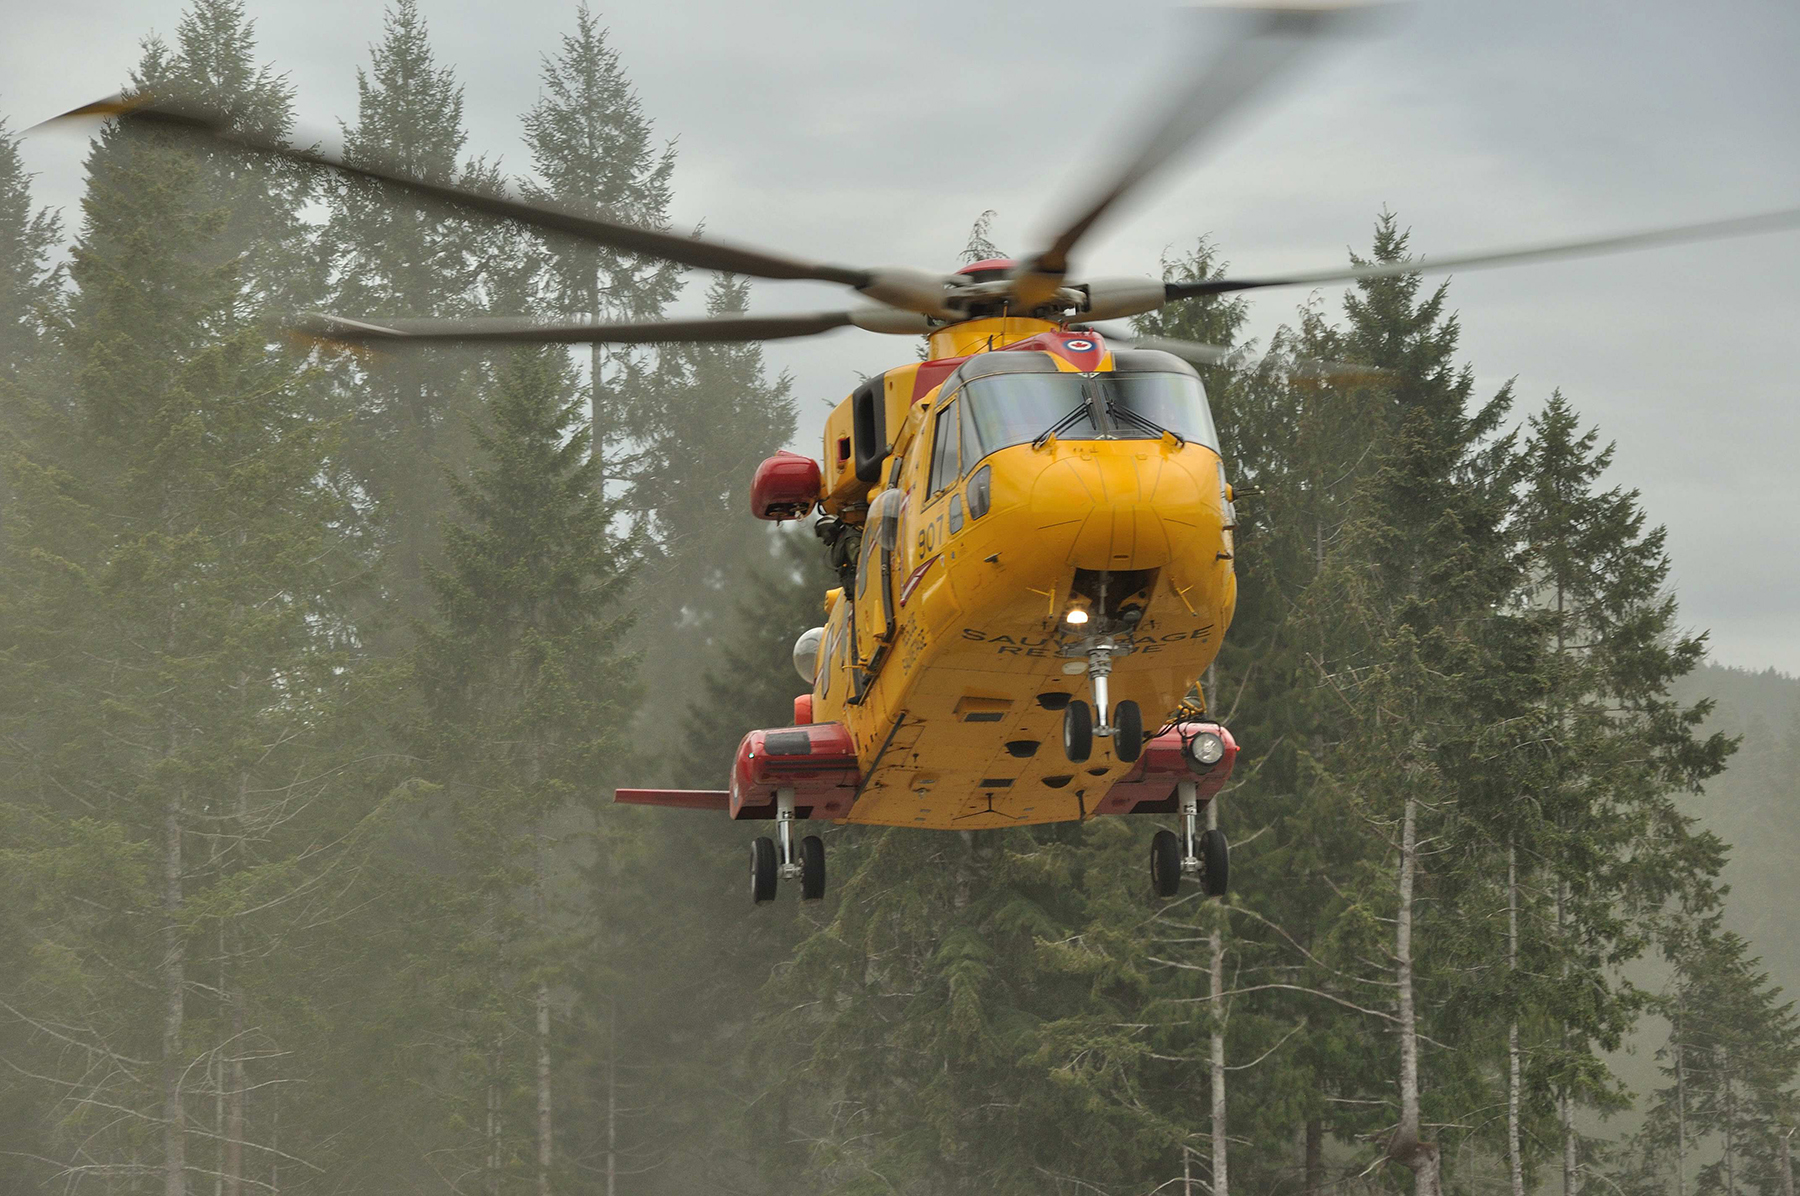 In this file photo, a Royal Canadian Air Force CH-149 Cormorant helicopter stirs up dust while hovering in front of trees. PHOTO: DND, ISX2012-0020